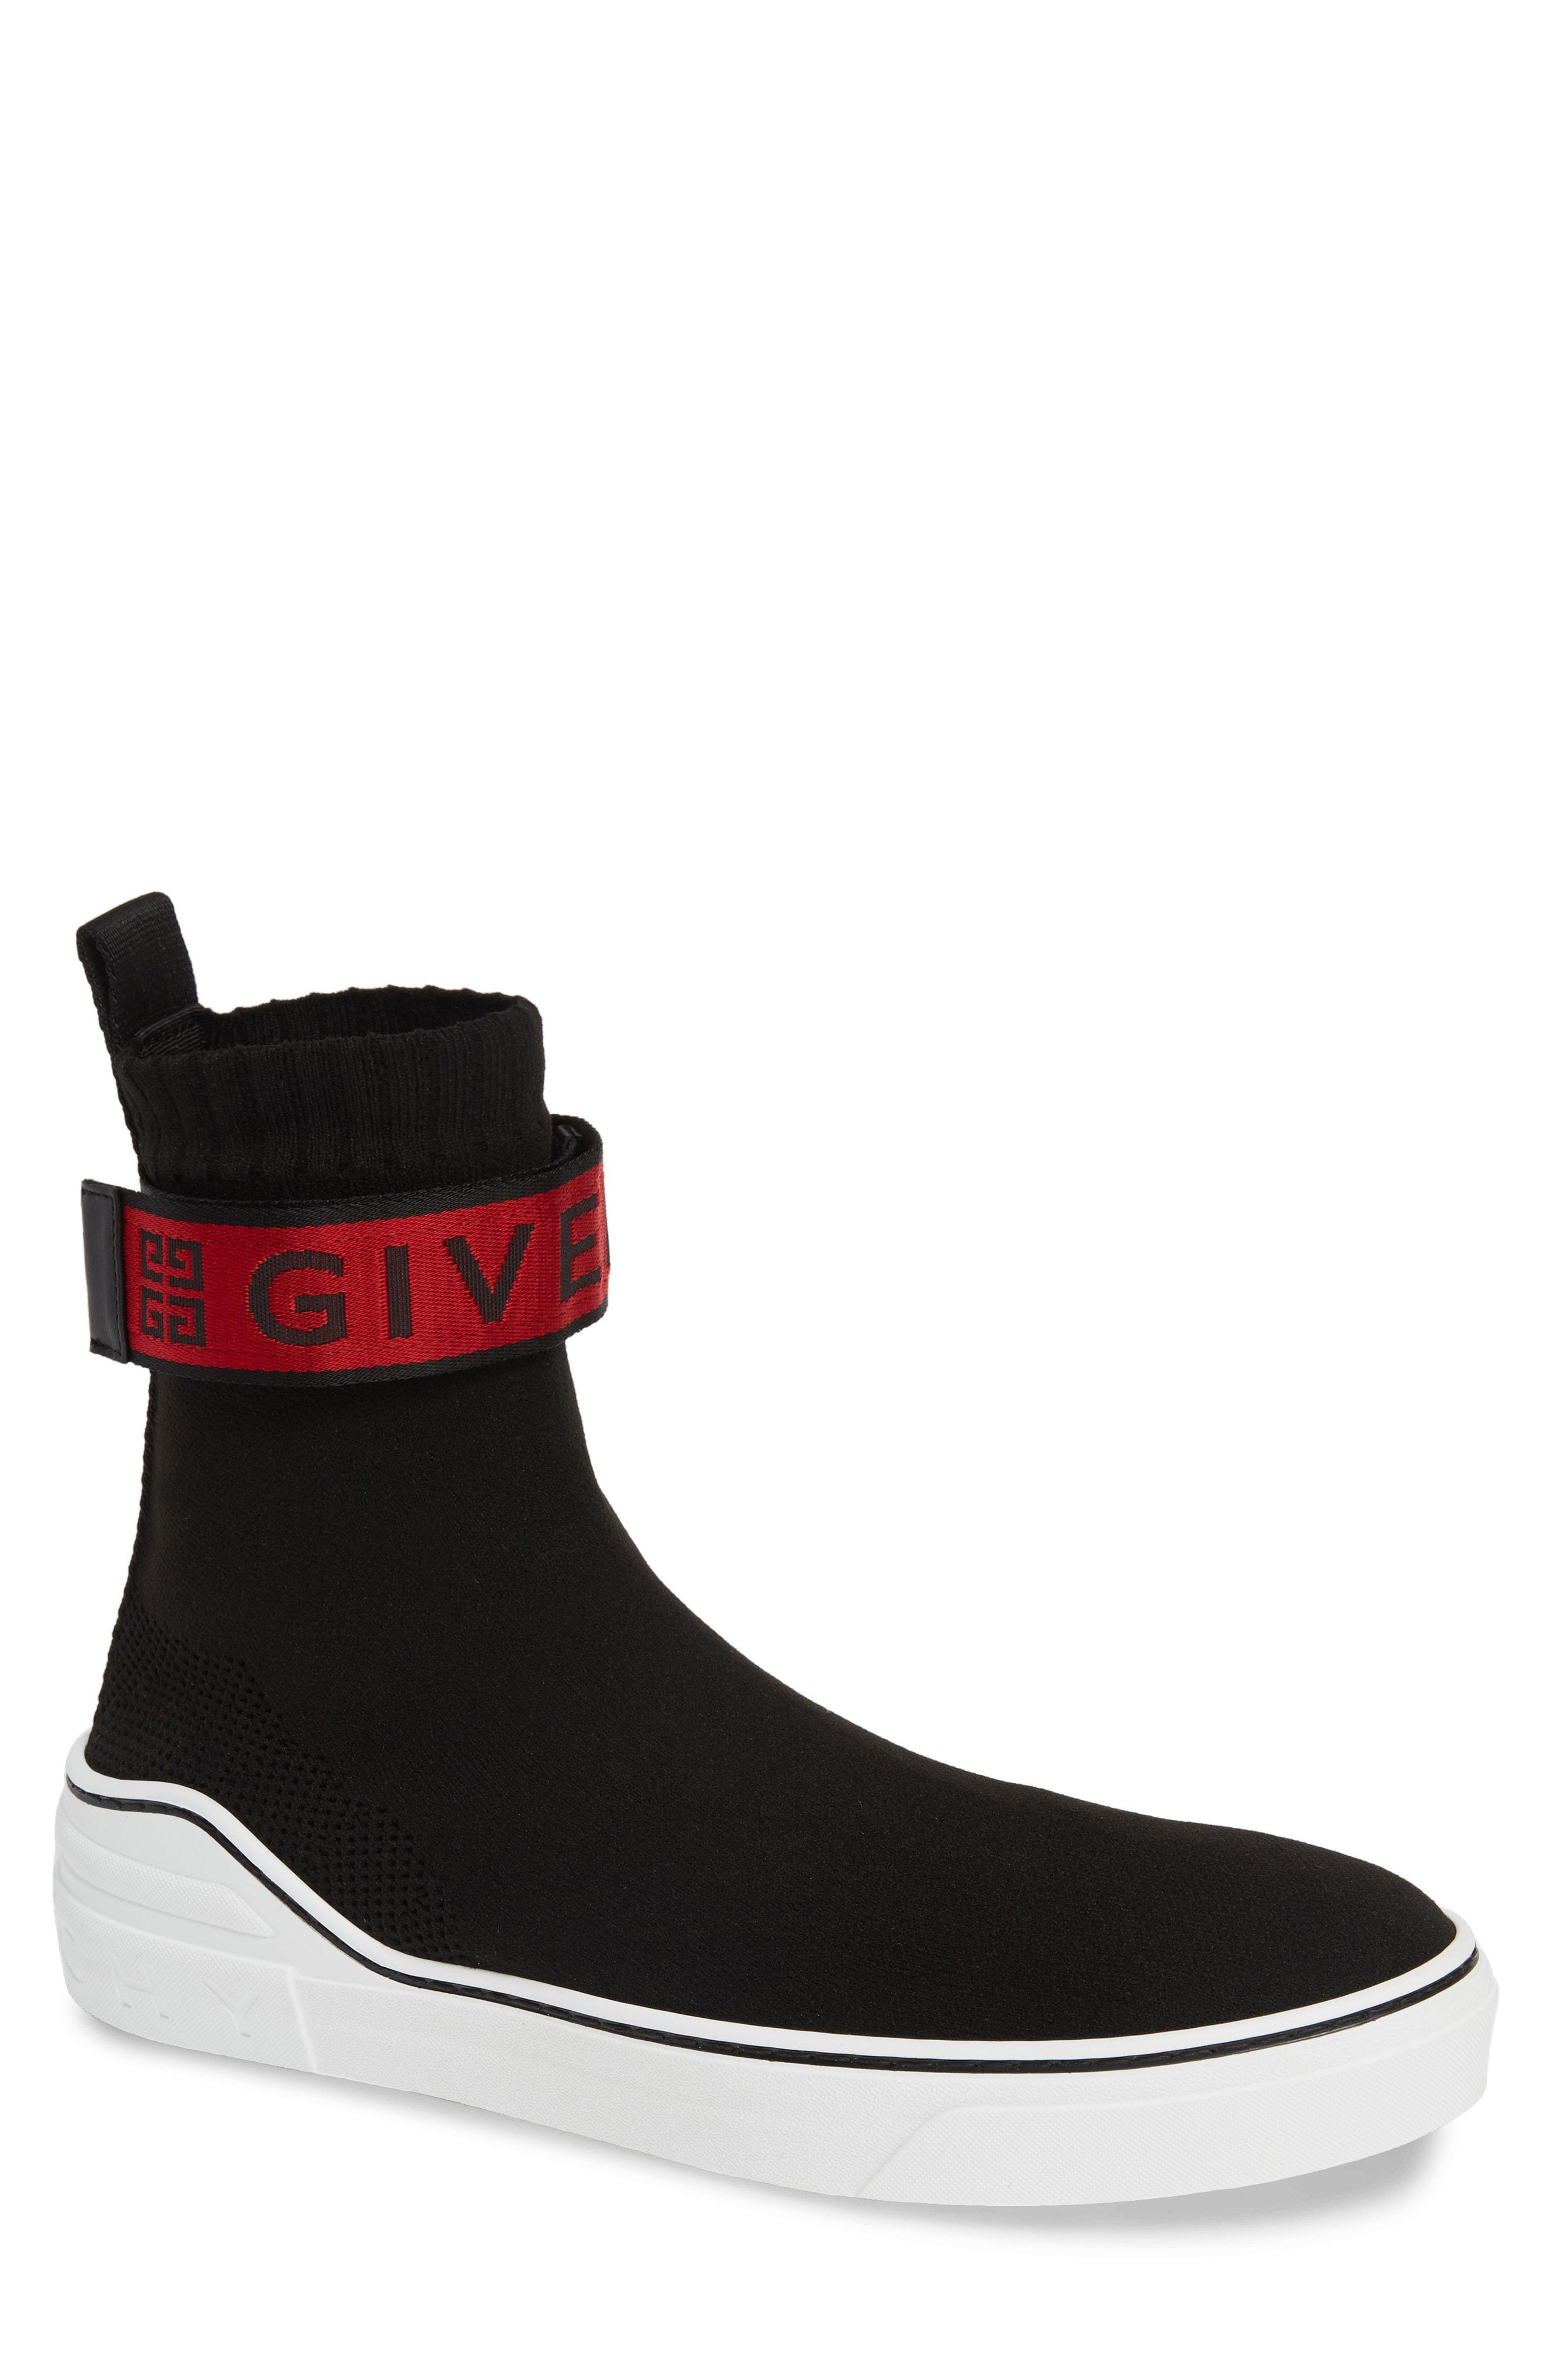 givenchy george v sneakers review